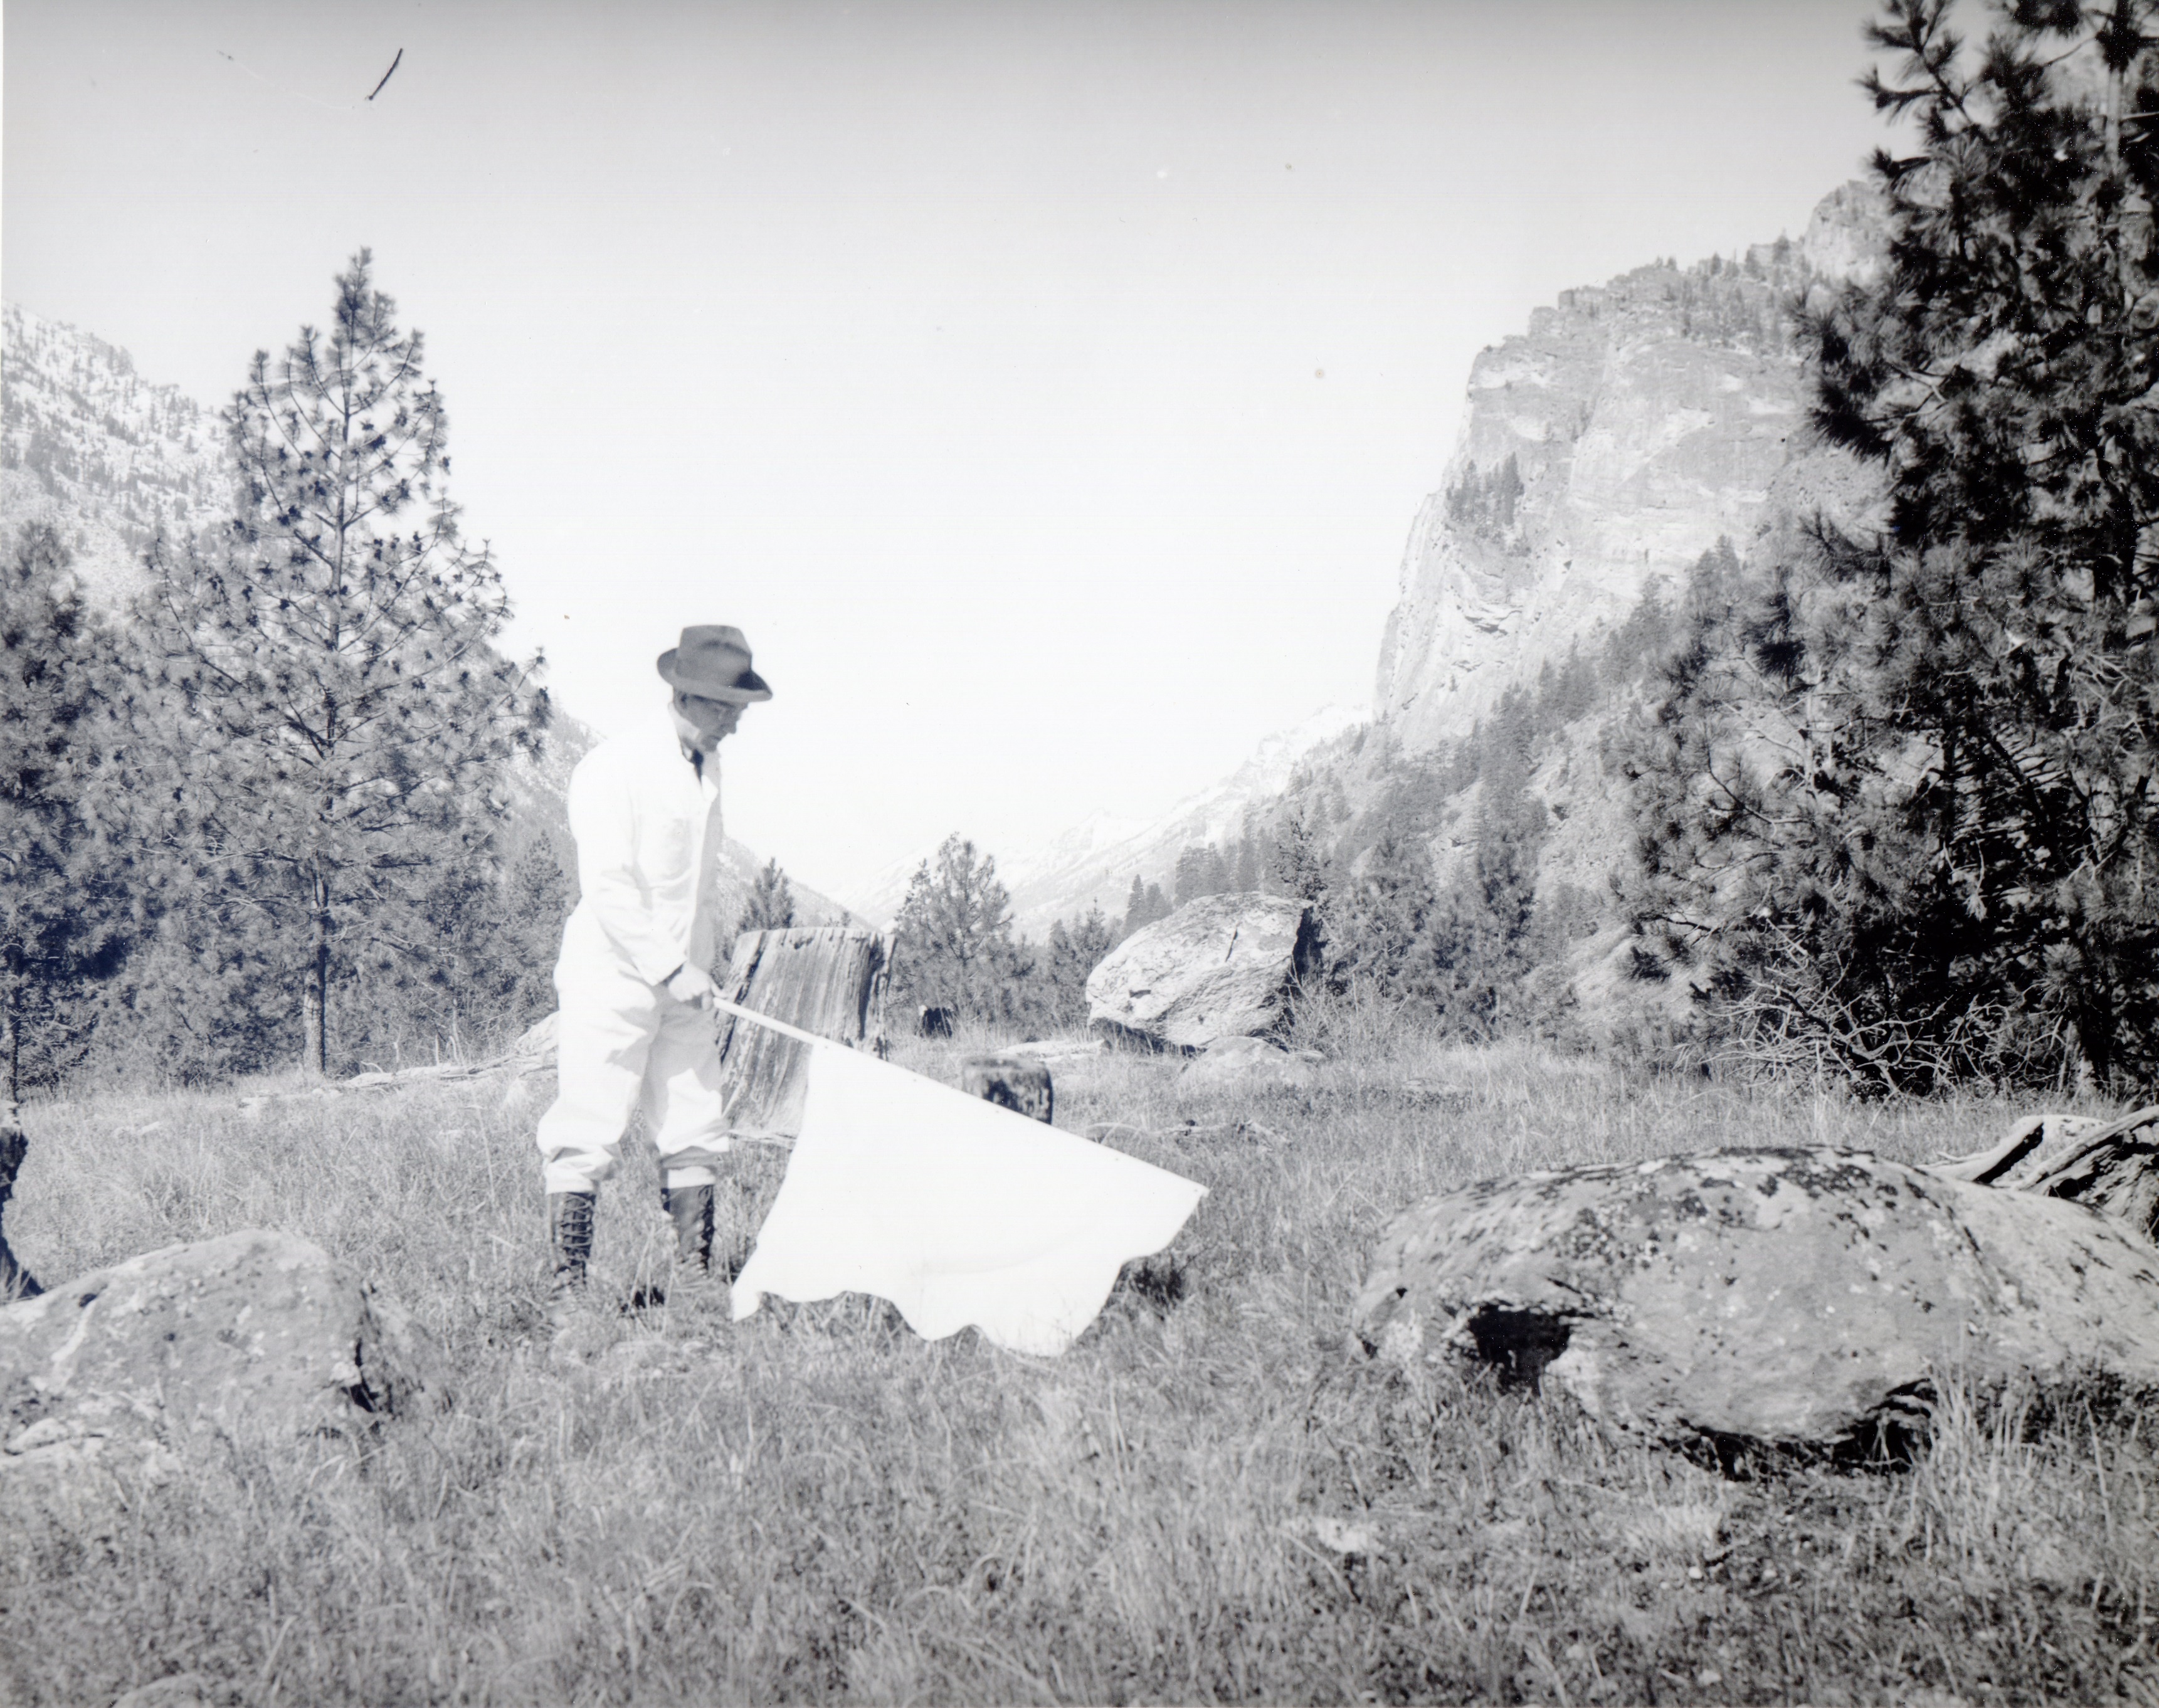 Man dressed in white with pants tucked in boots waves large white flag over meadow grass in high mountains.